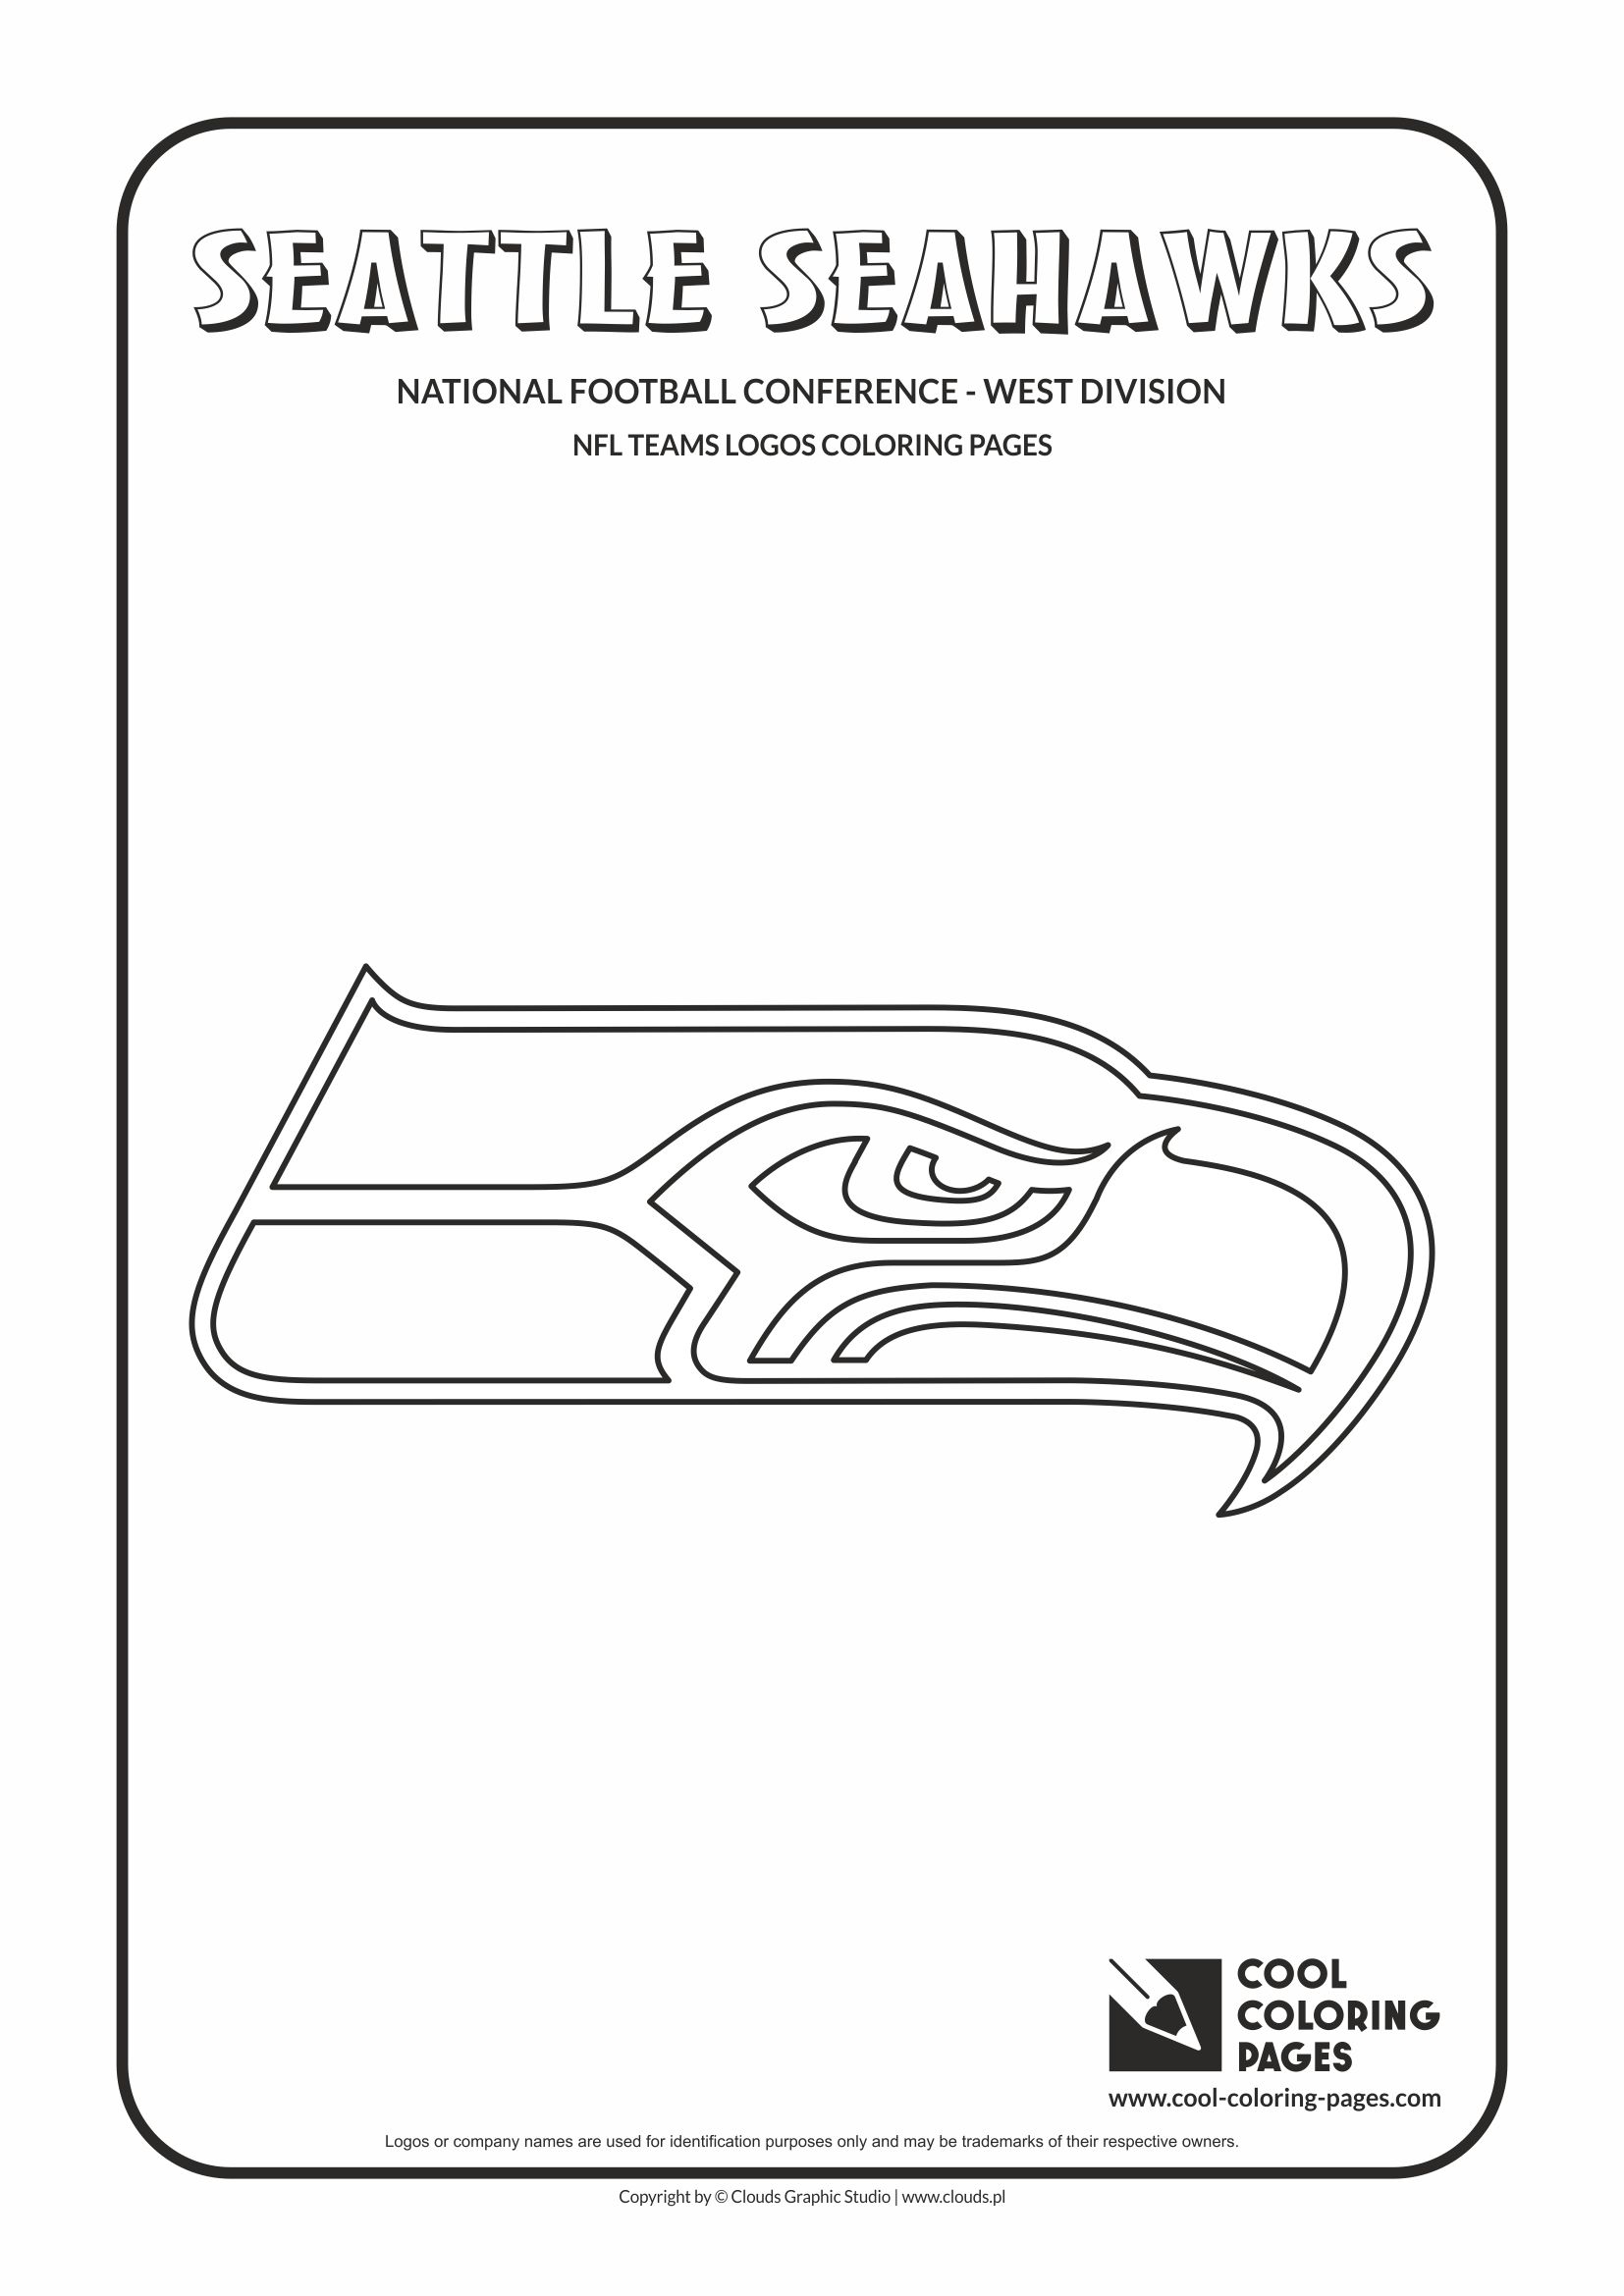 Cool Coloring Pages - NFL American Football Clubs Logos - National Football Conference - West Division / Seattle Seahawks logo / Coloring page with Seattle Seahawks logo